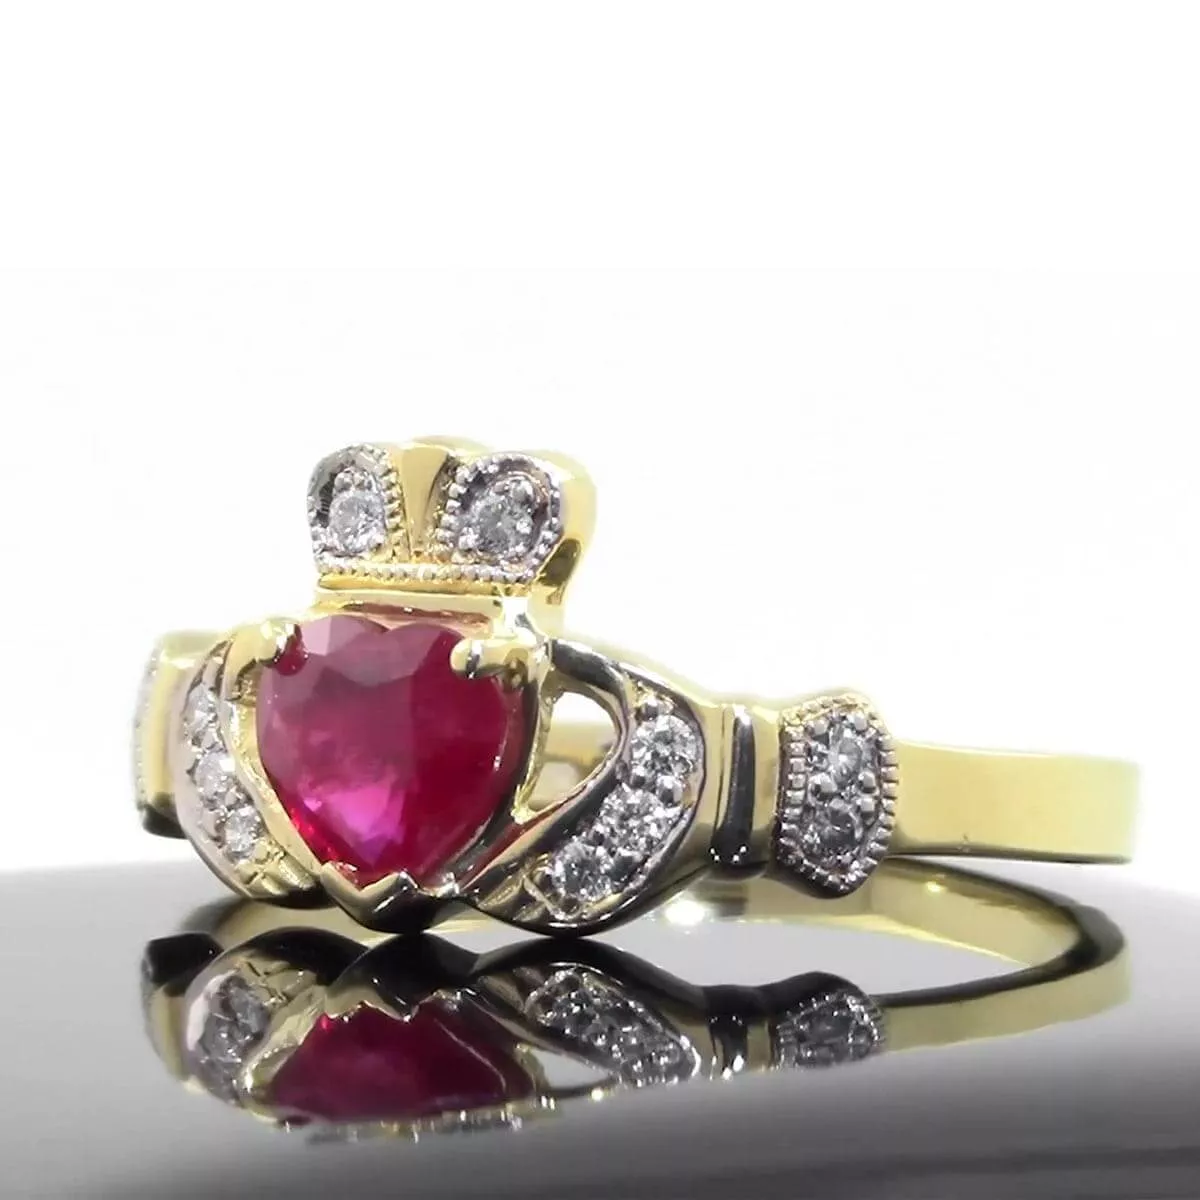 Claddagh Ring With Ruby Stone 2 3